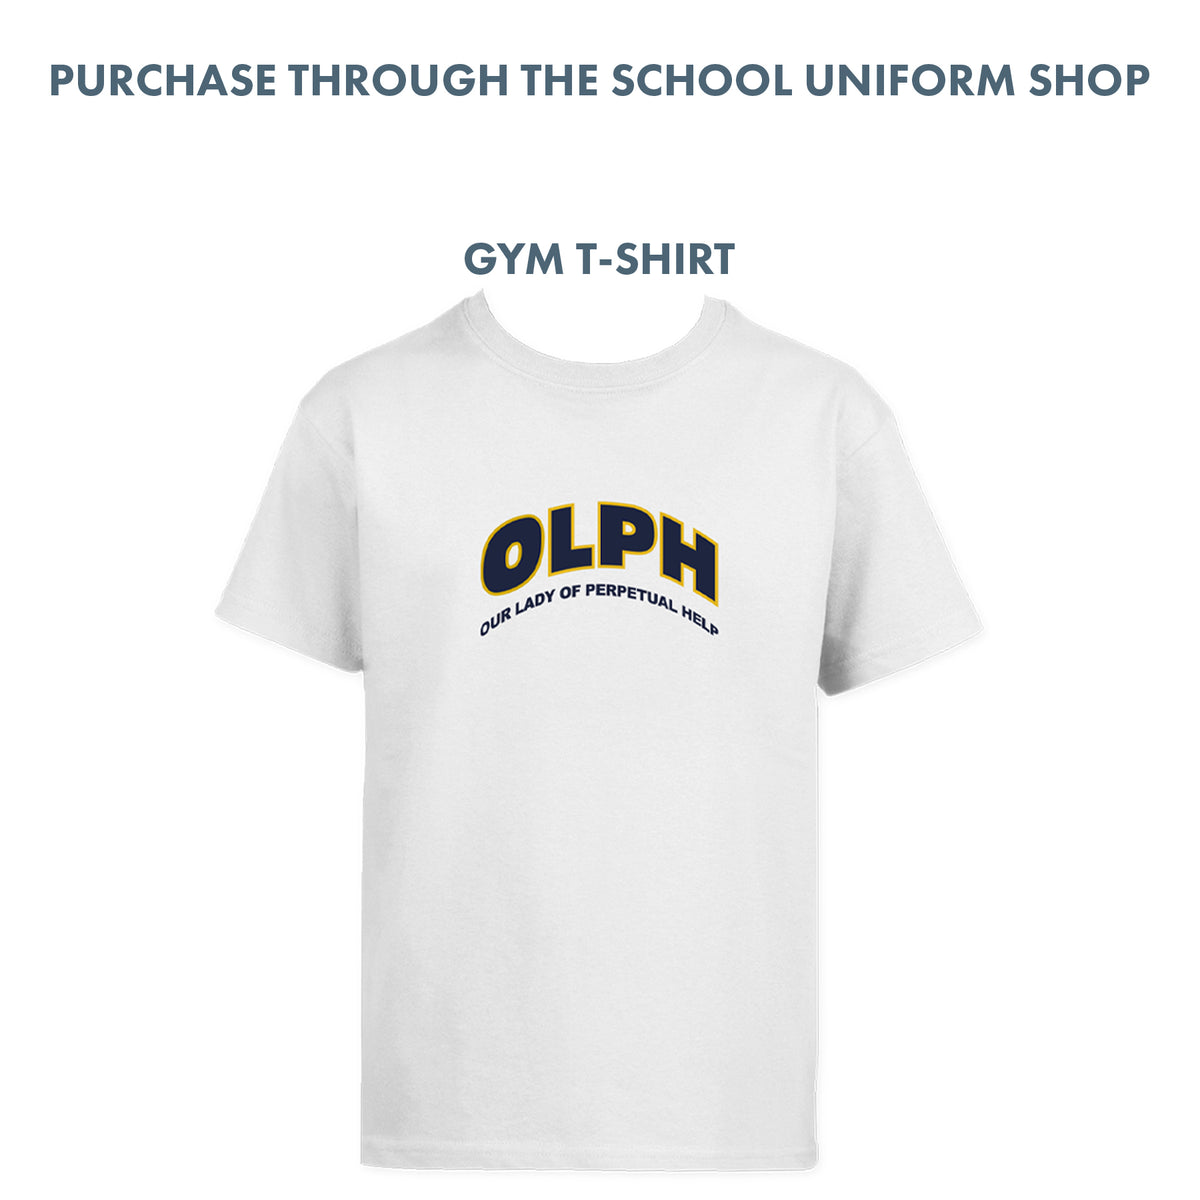 PURCHASE THROUGH THE SCHOOL